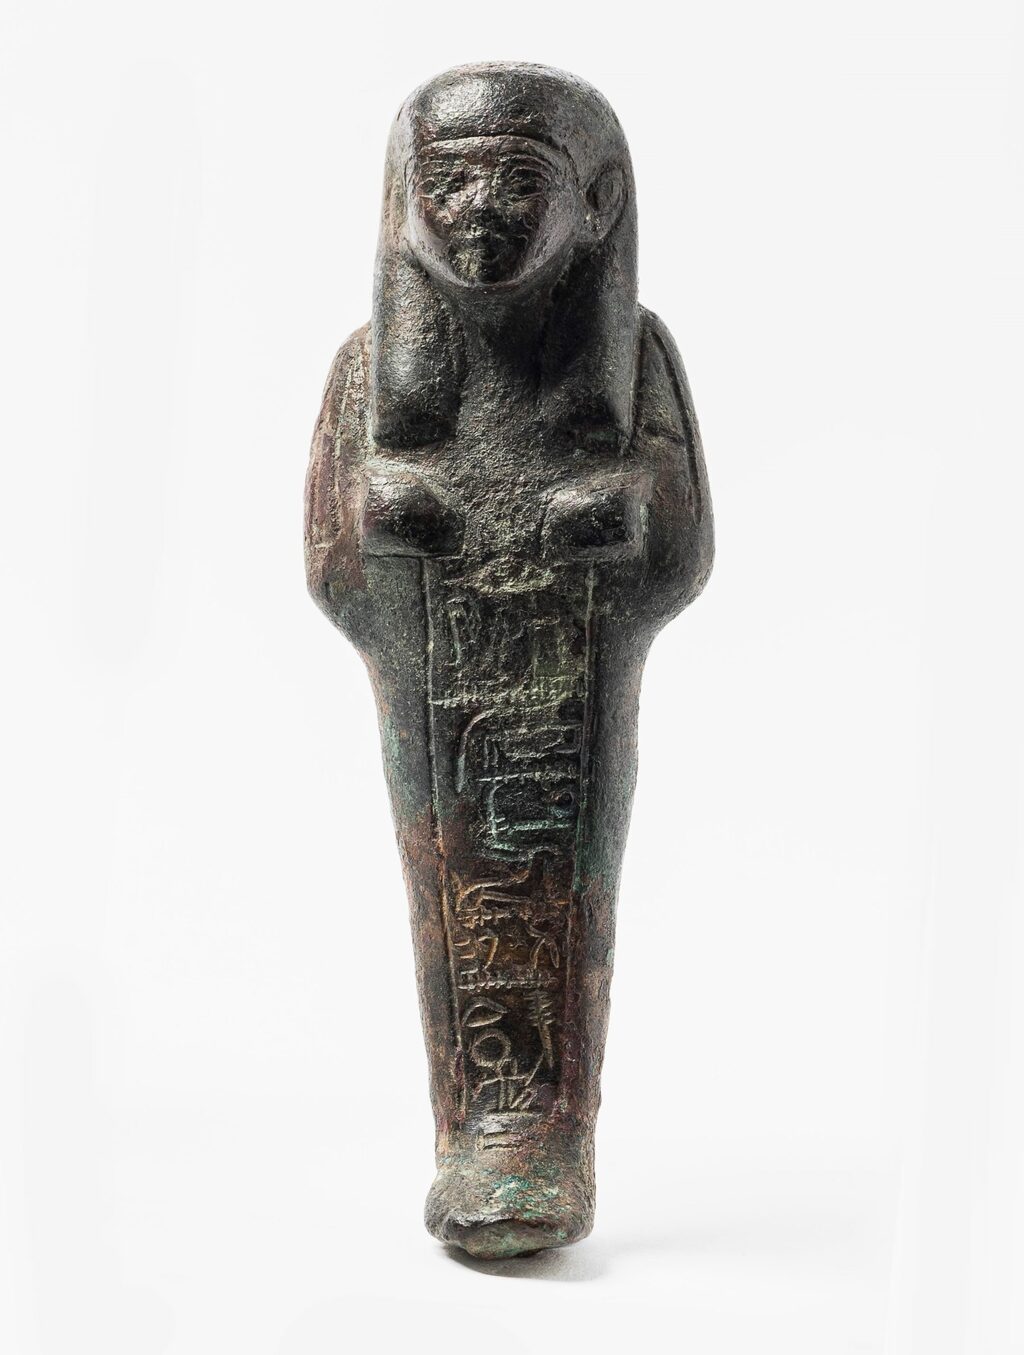 Ushabti, or funerary figurine, of the high official Wendjebauendjed 